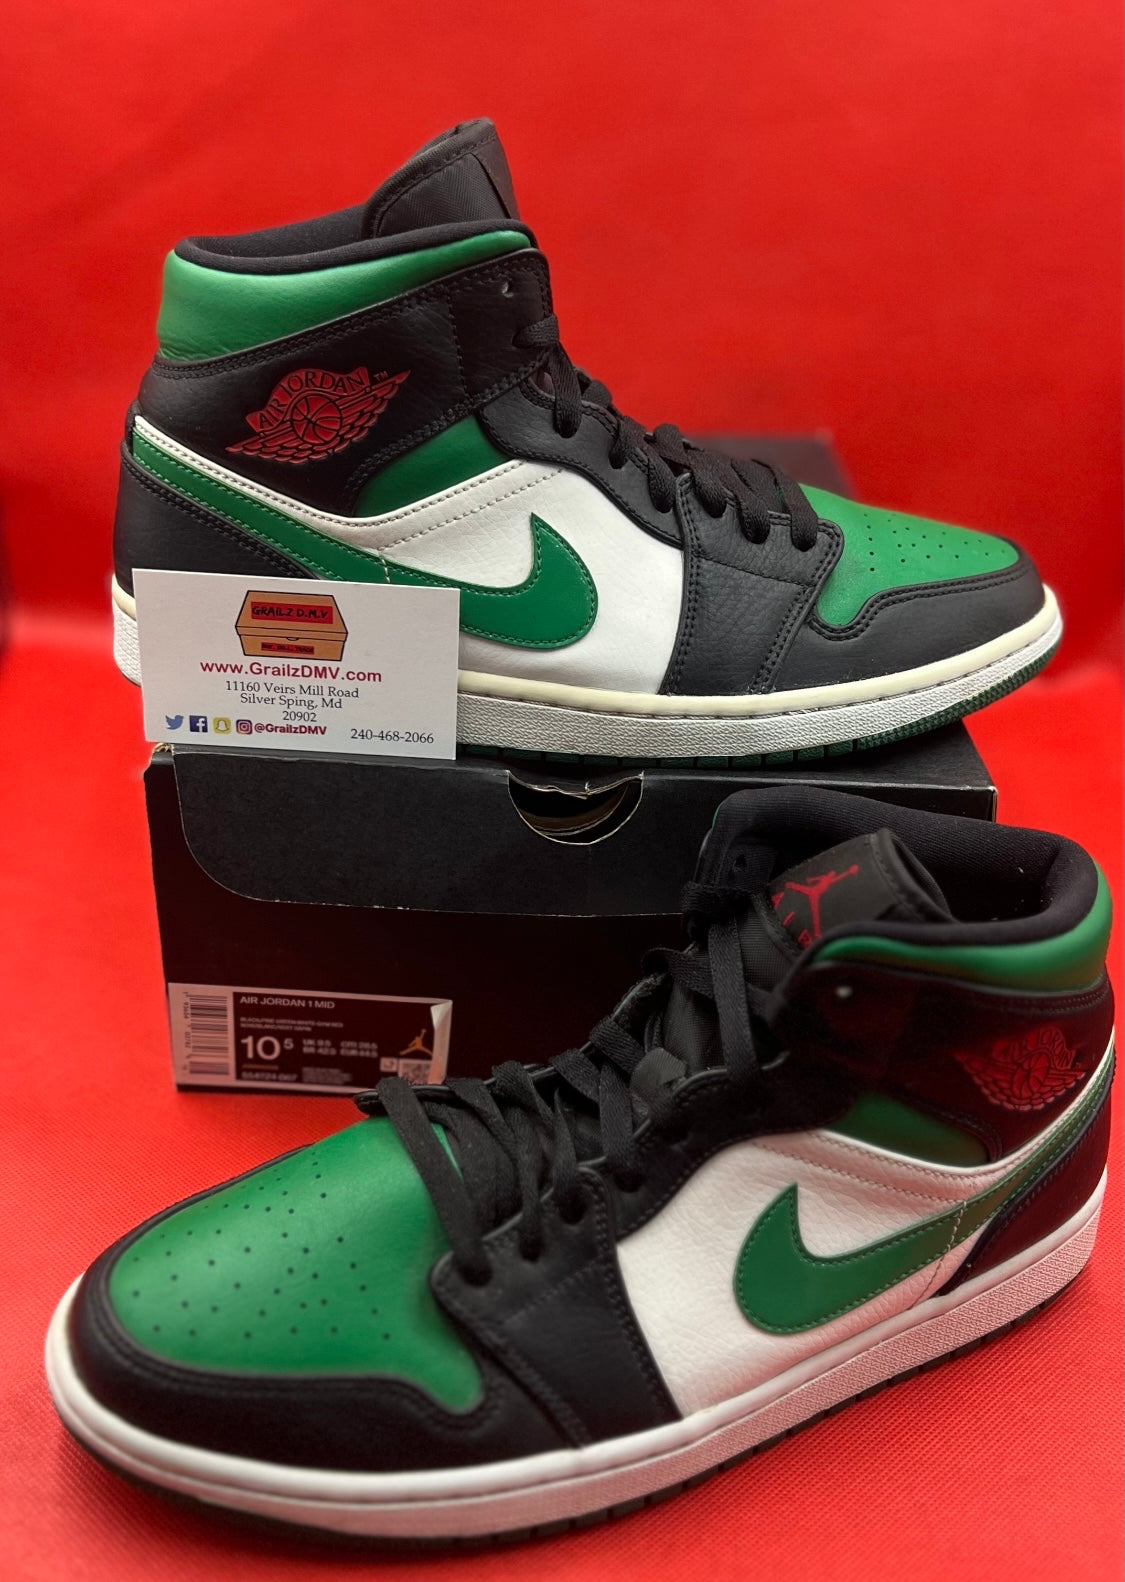 Pine Green Mid 1s Size 10.5